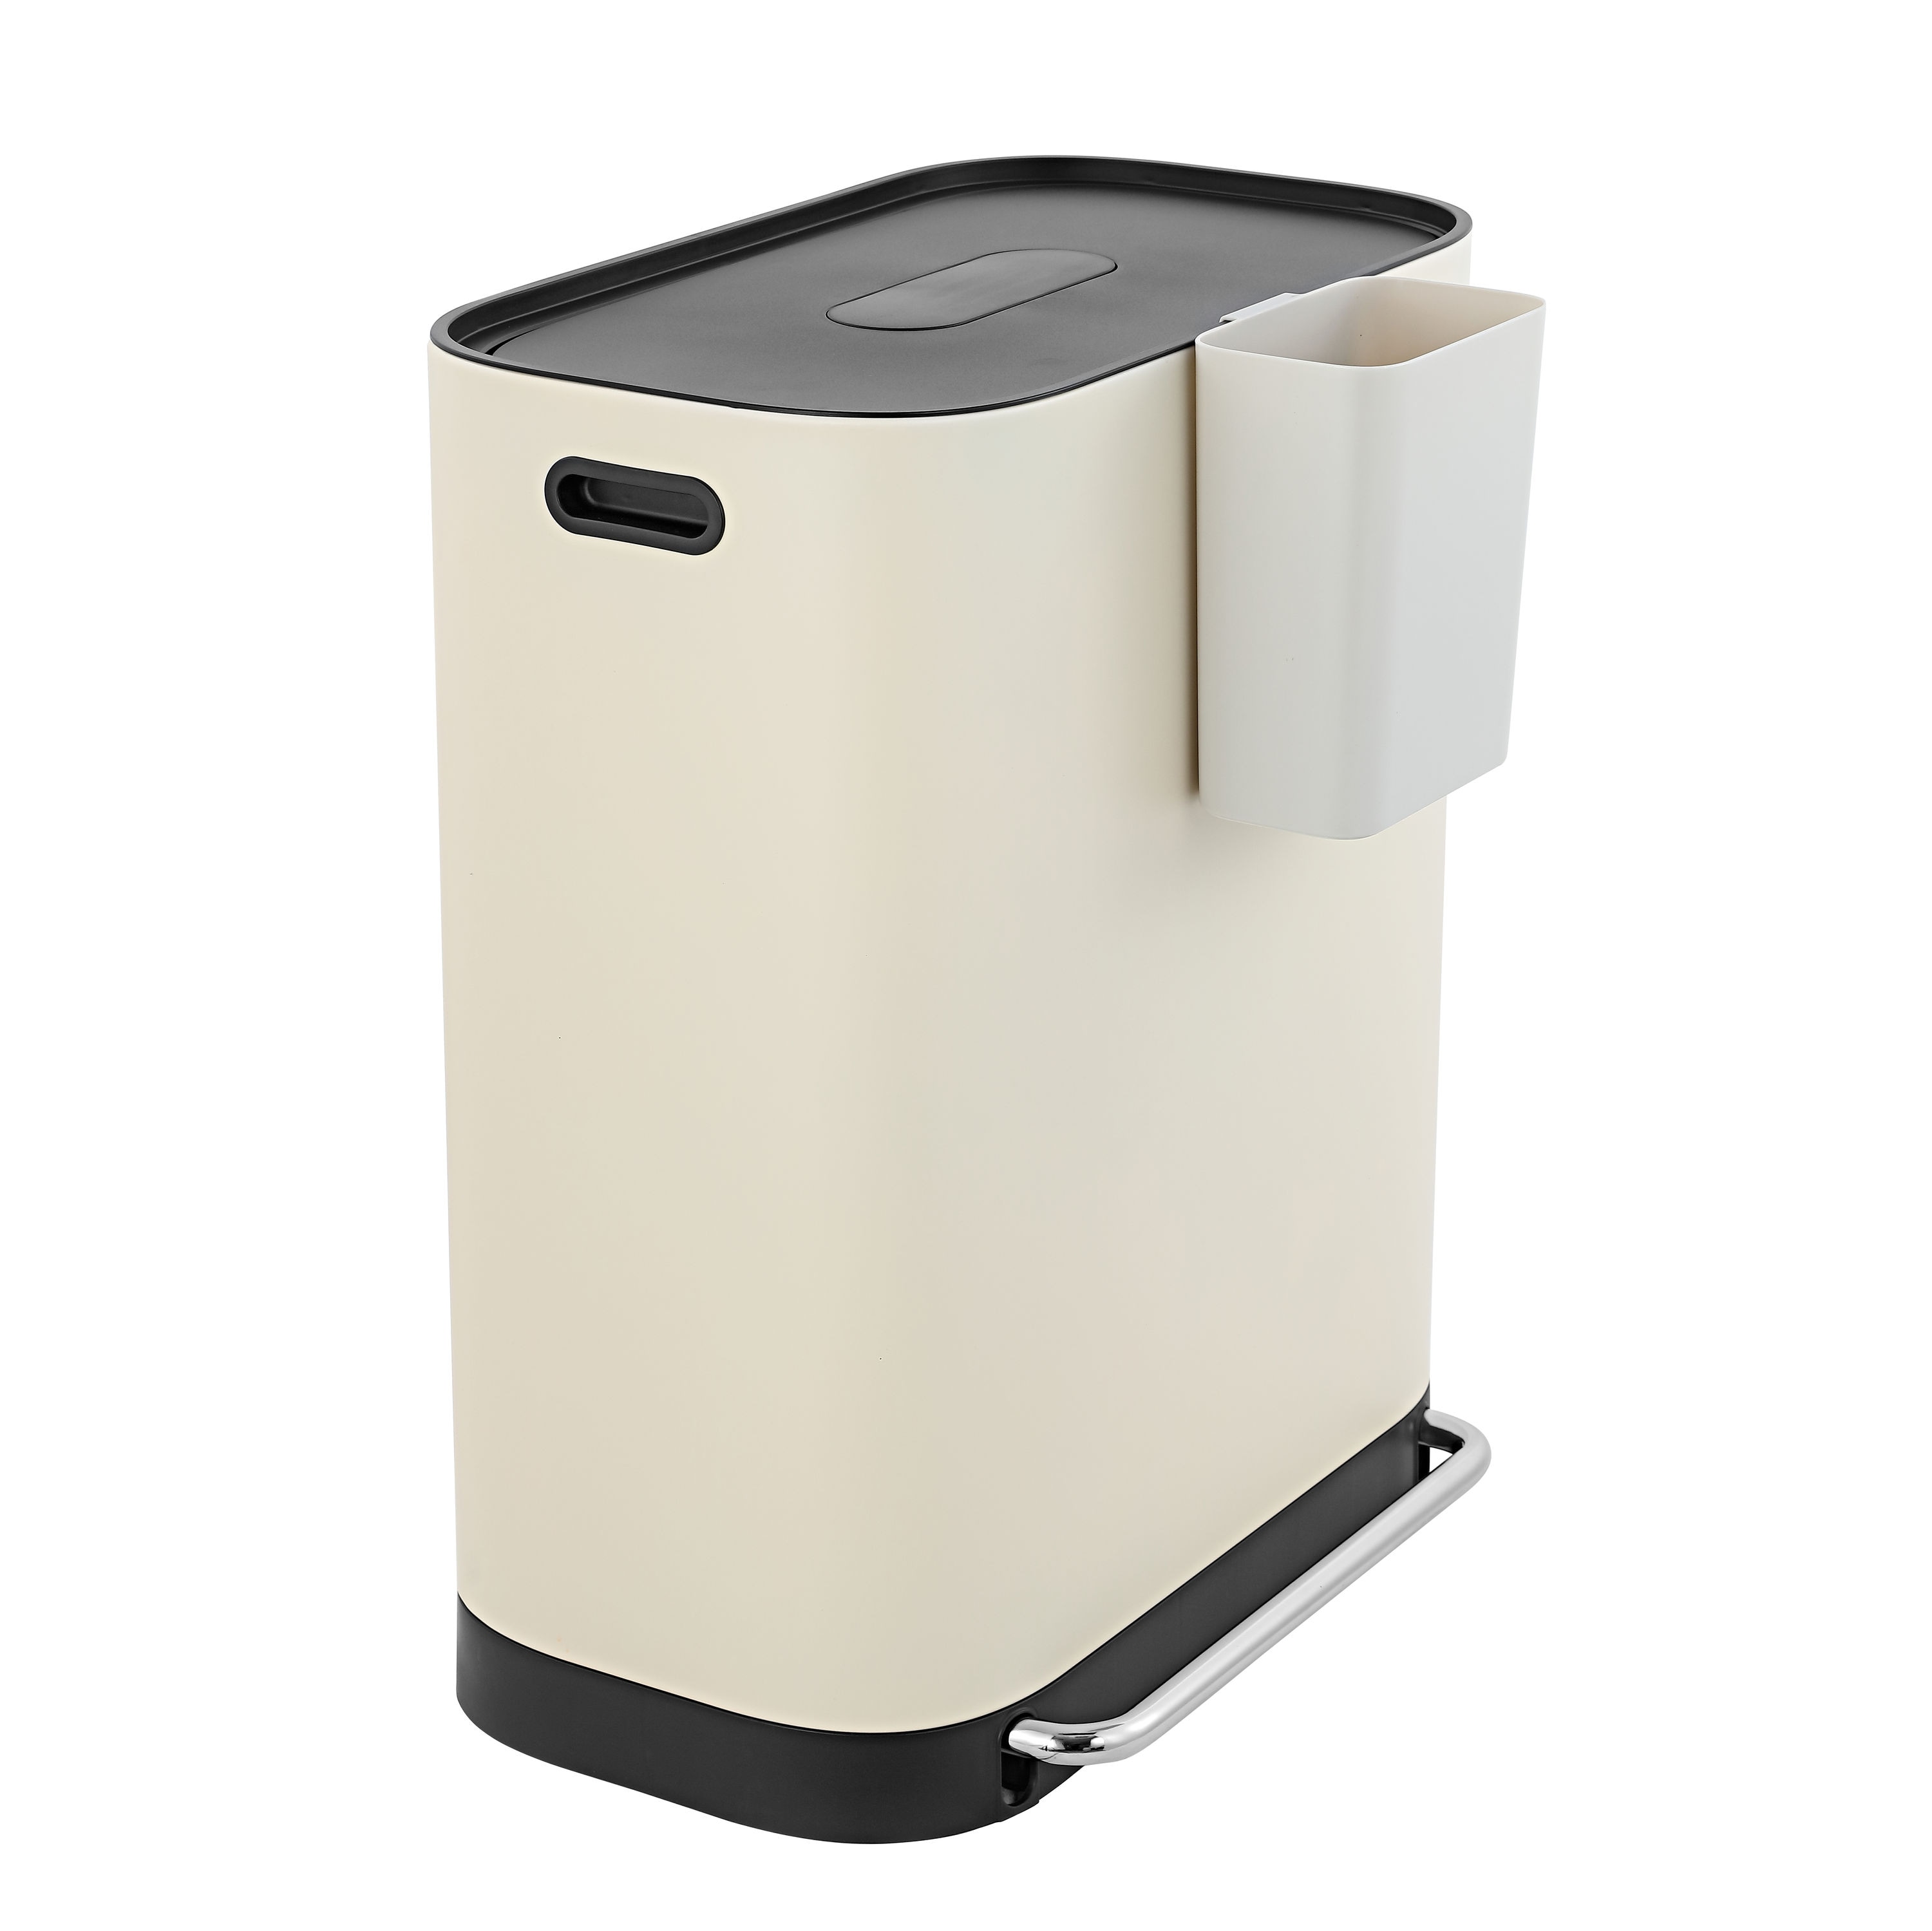 Brown Step Open Trash Can for Kitchen - Bed Bath & Beyond - 35302288